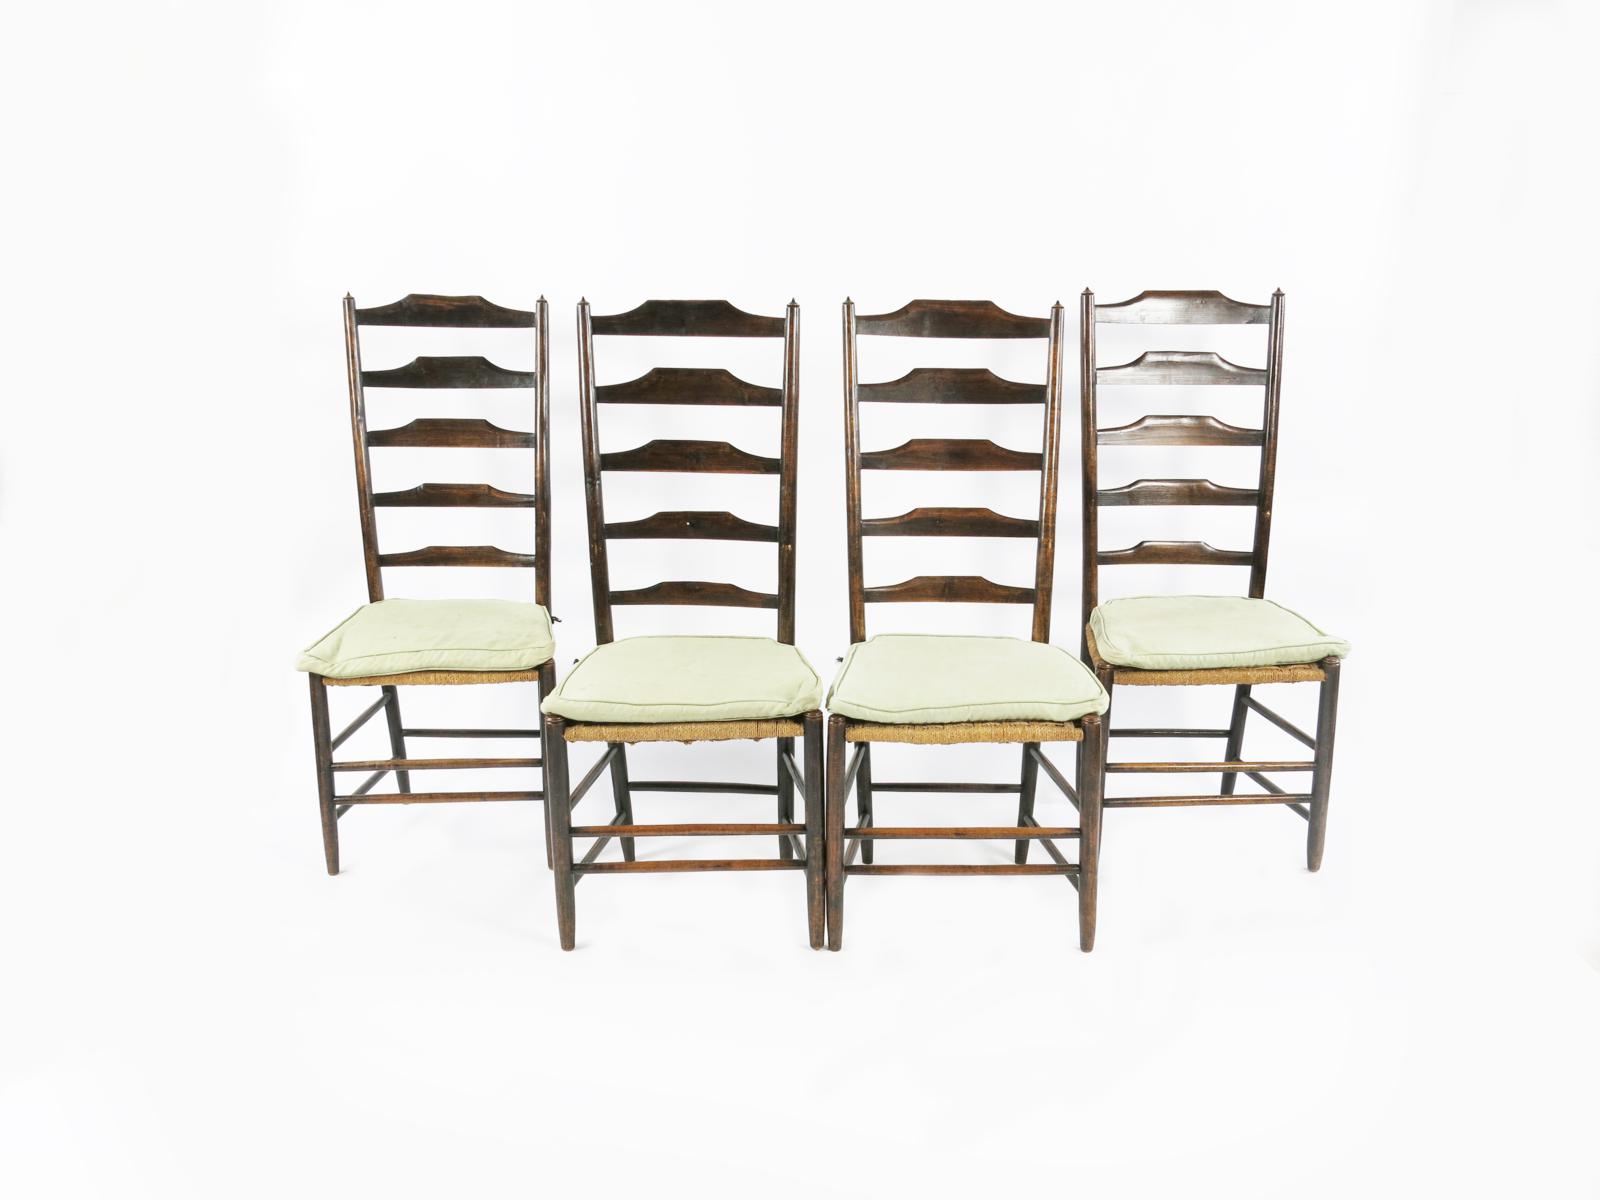 A set of six Clissett High Back ladder-back chairs designed by Ernest Gimson, with strung seats,